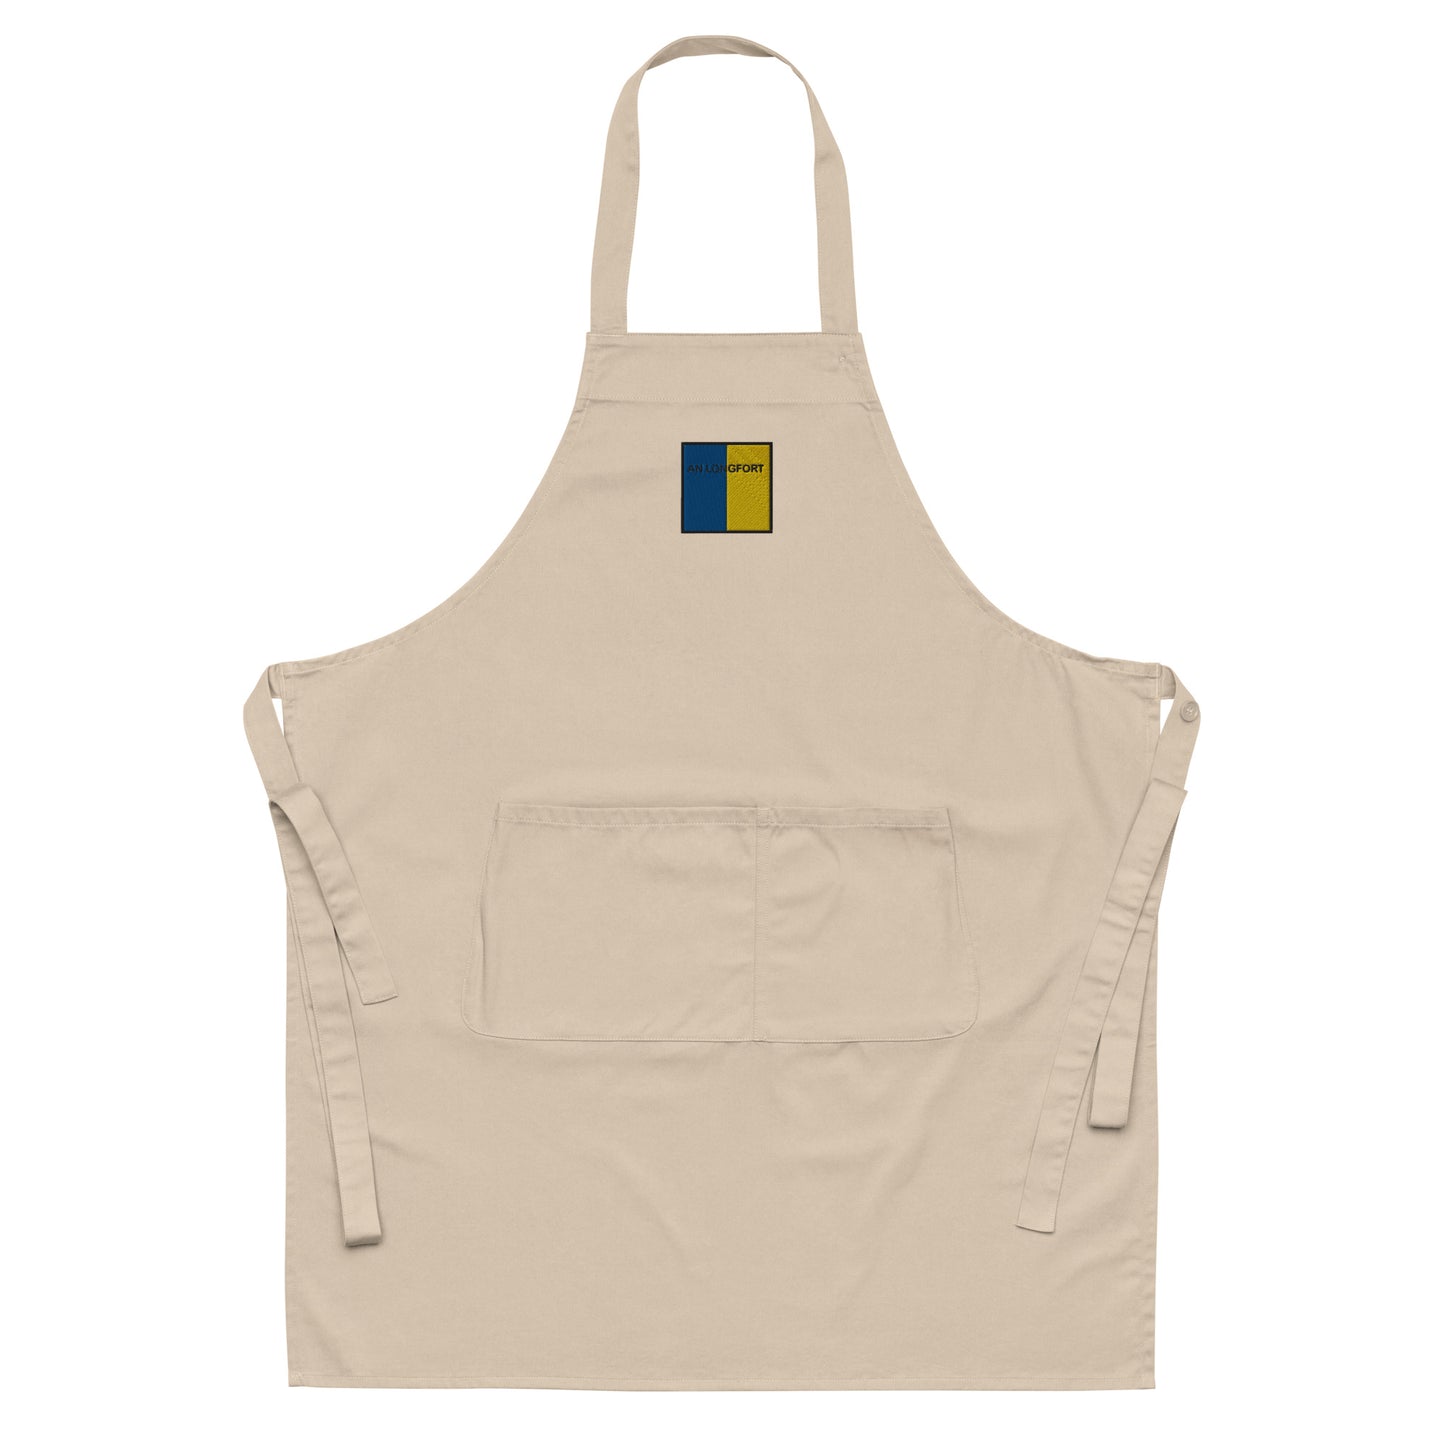 Embroidered An Longfort Apron - 100% organic cotton